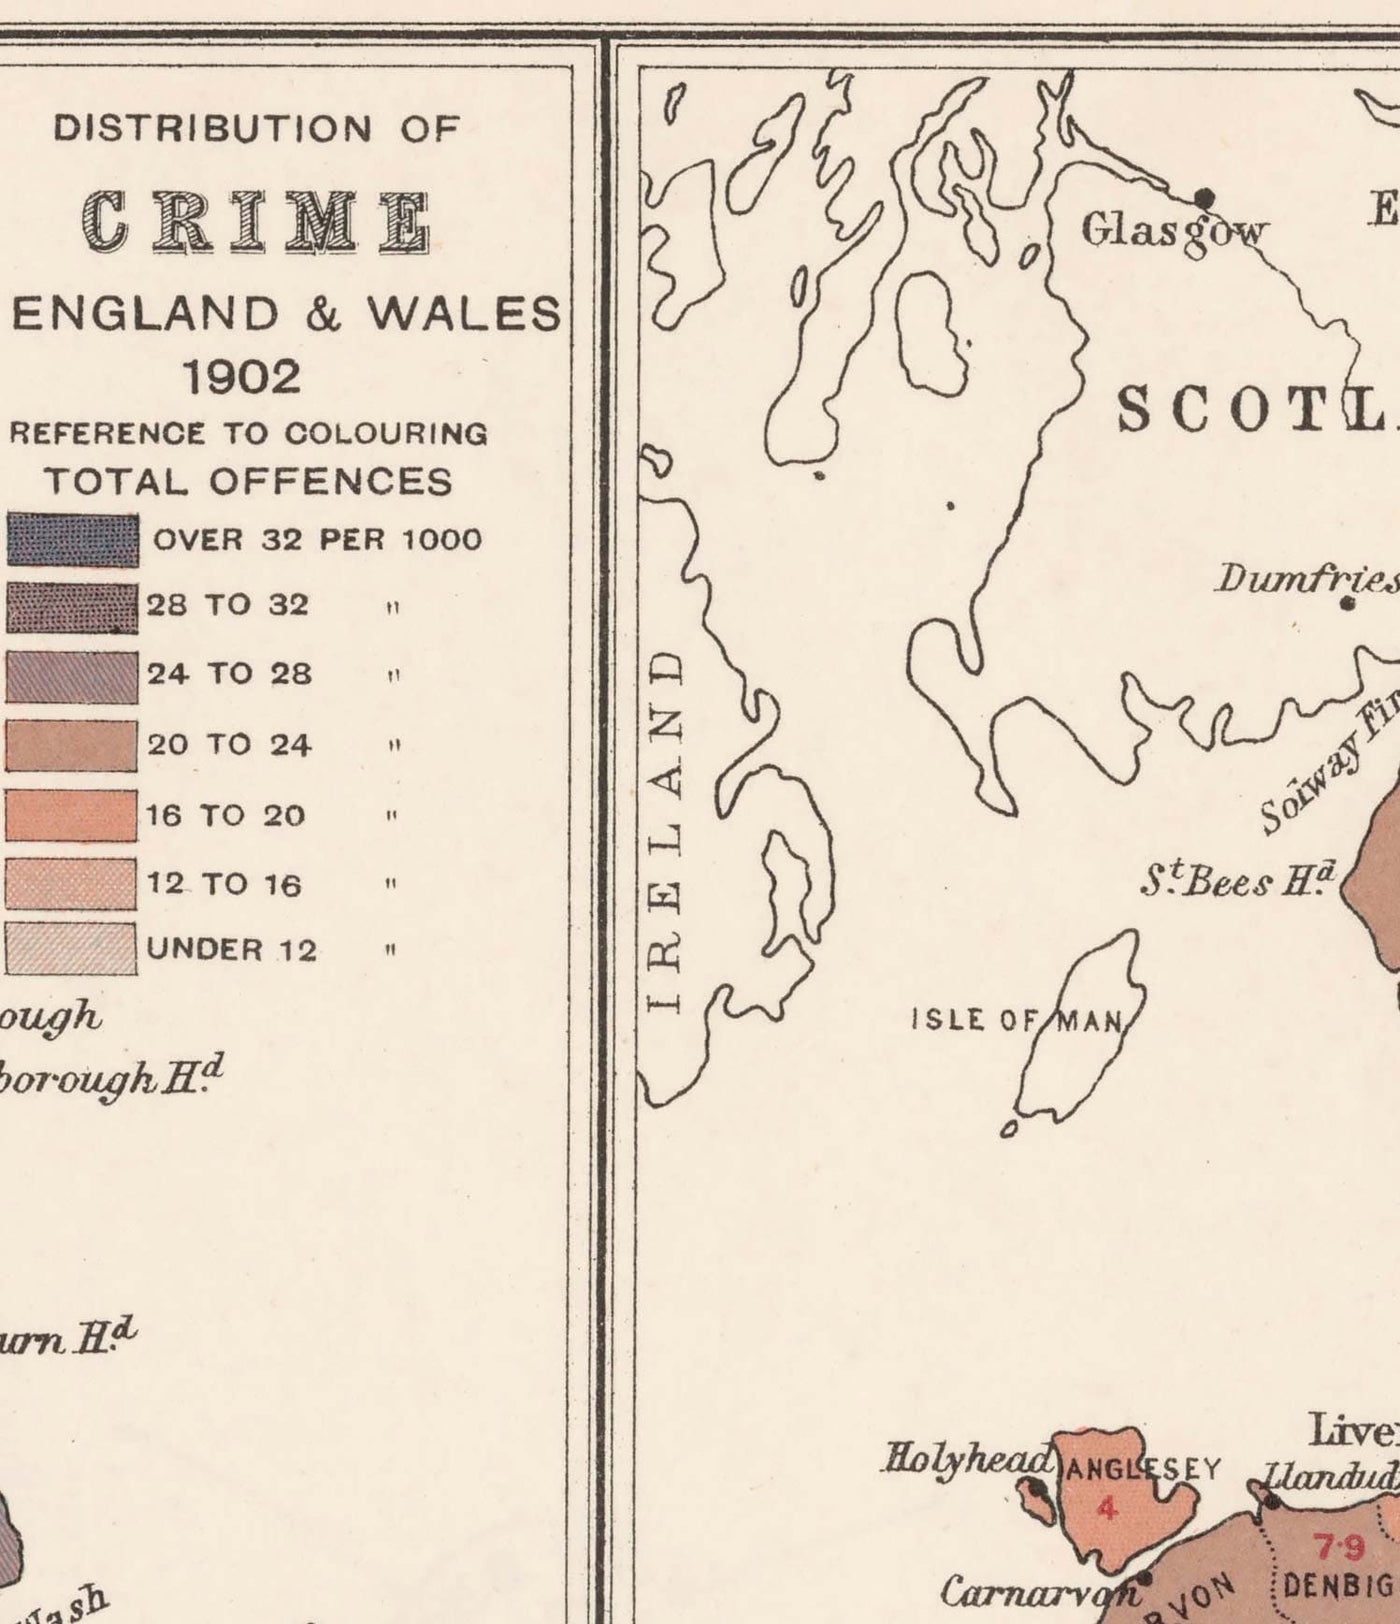 Old Map of Crime & Drunkenness in England and Wales, 1904 - Great Britain 1901 Census & Demographics